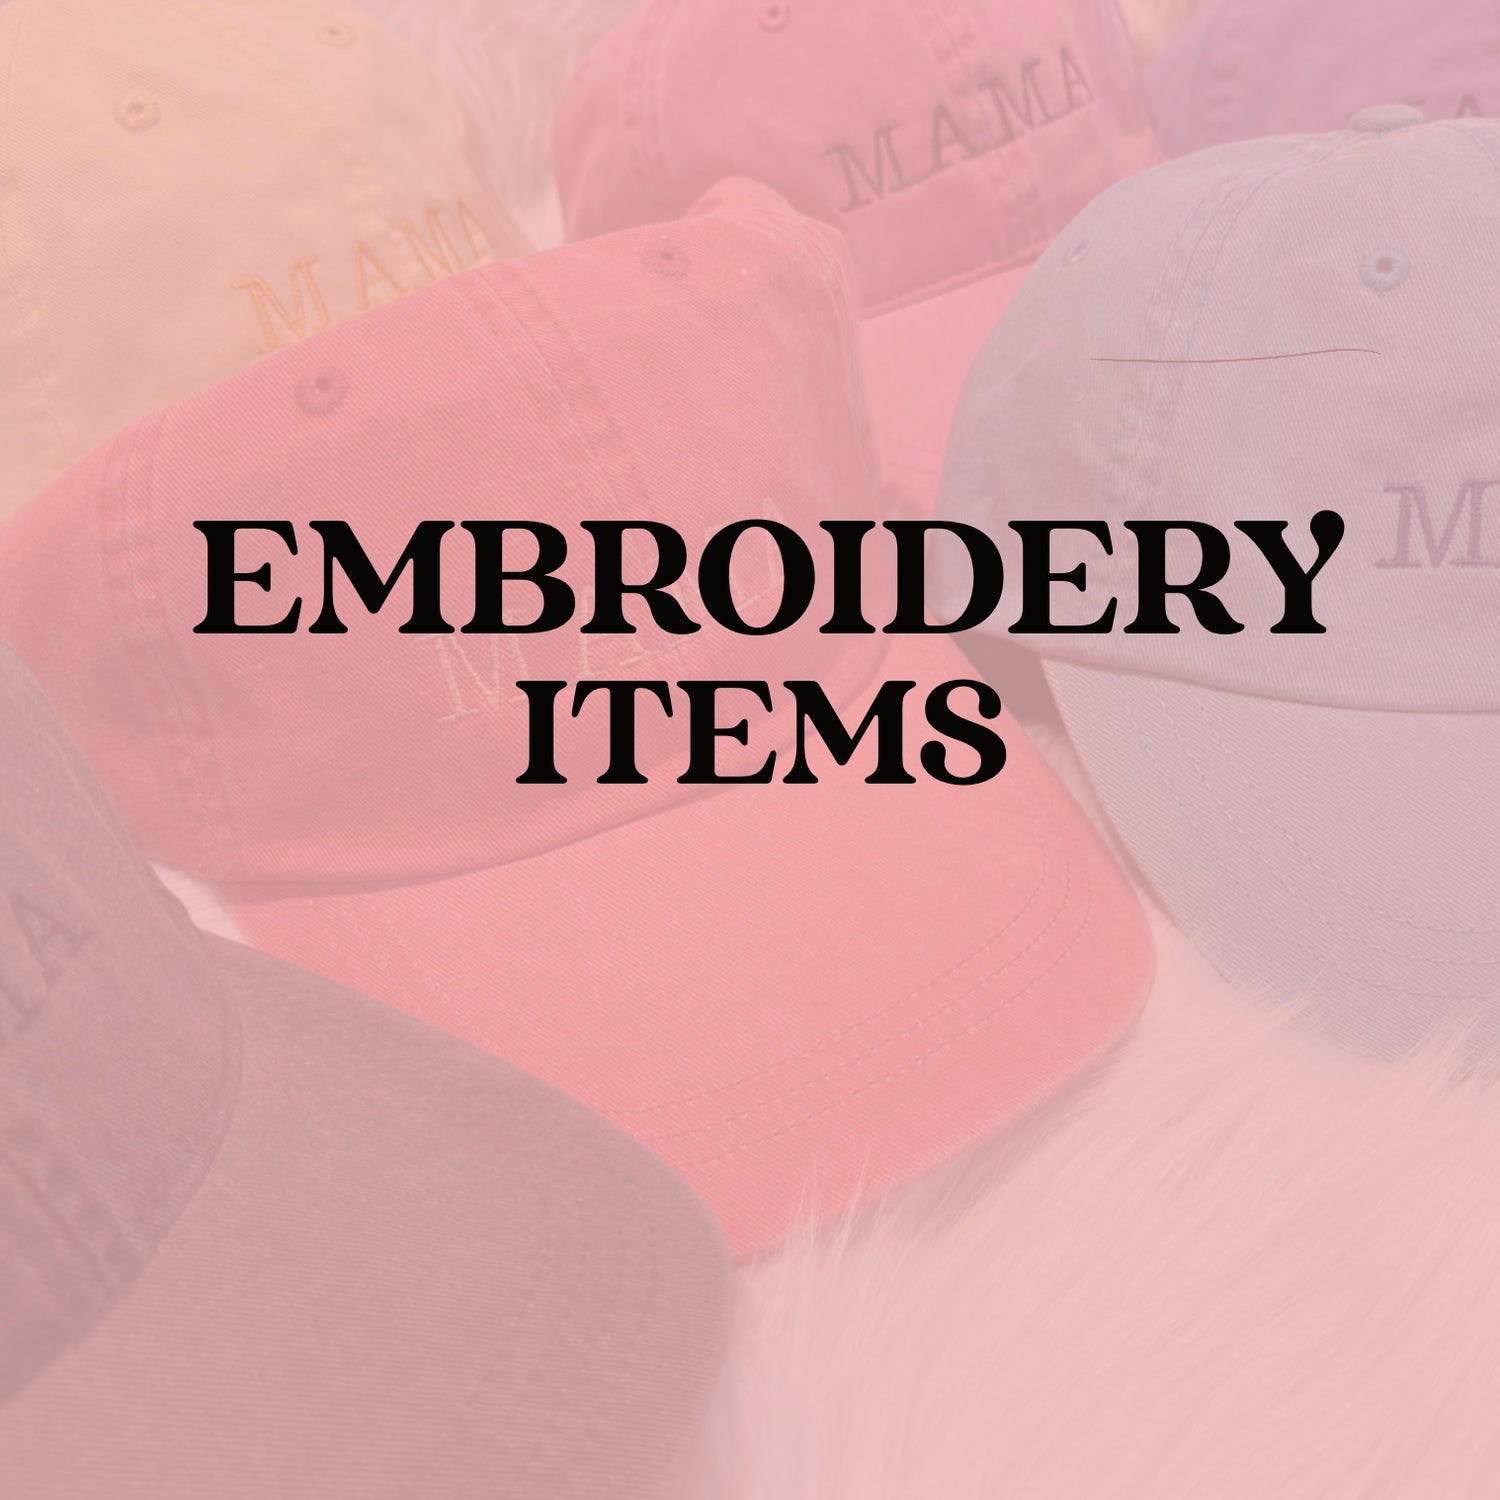 All Embroidery